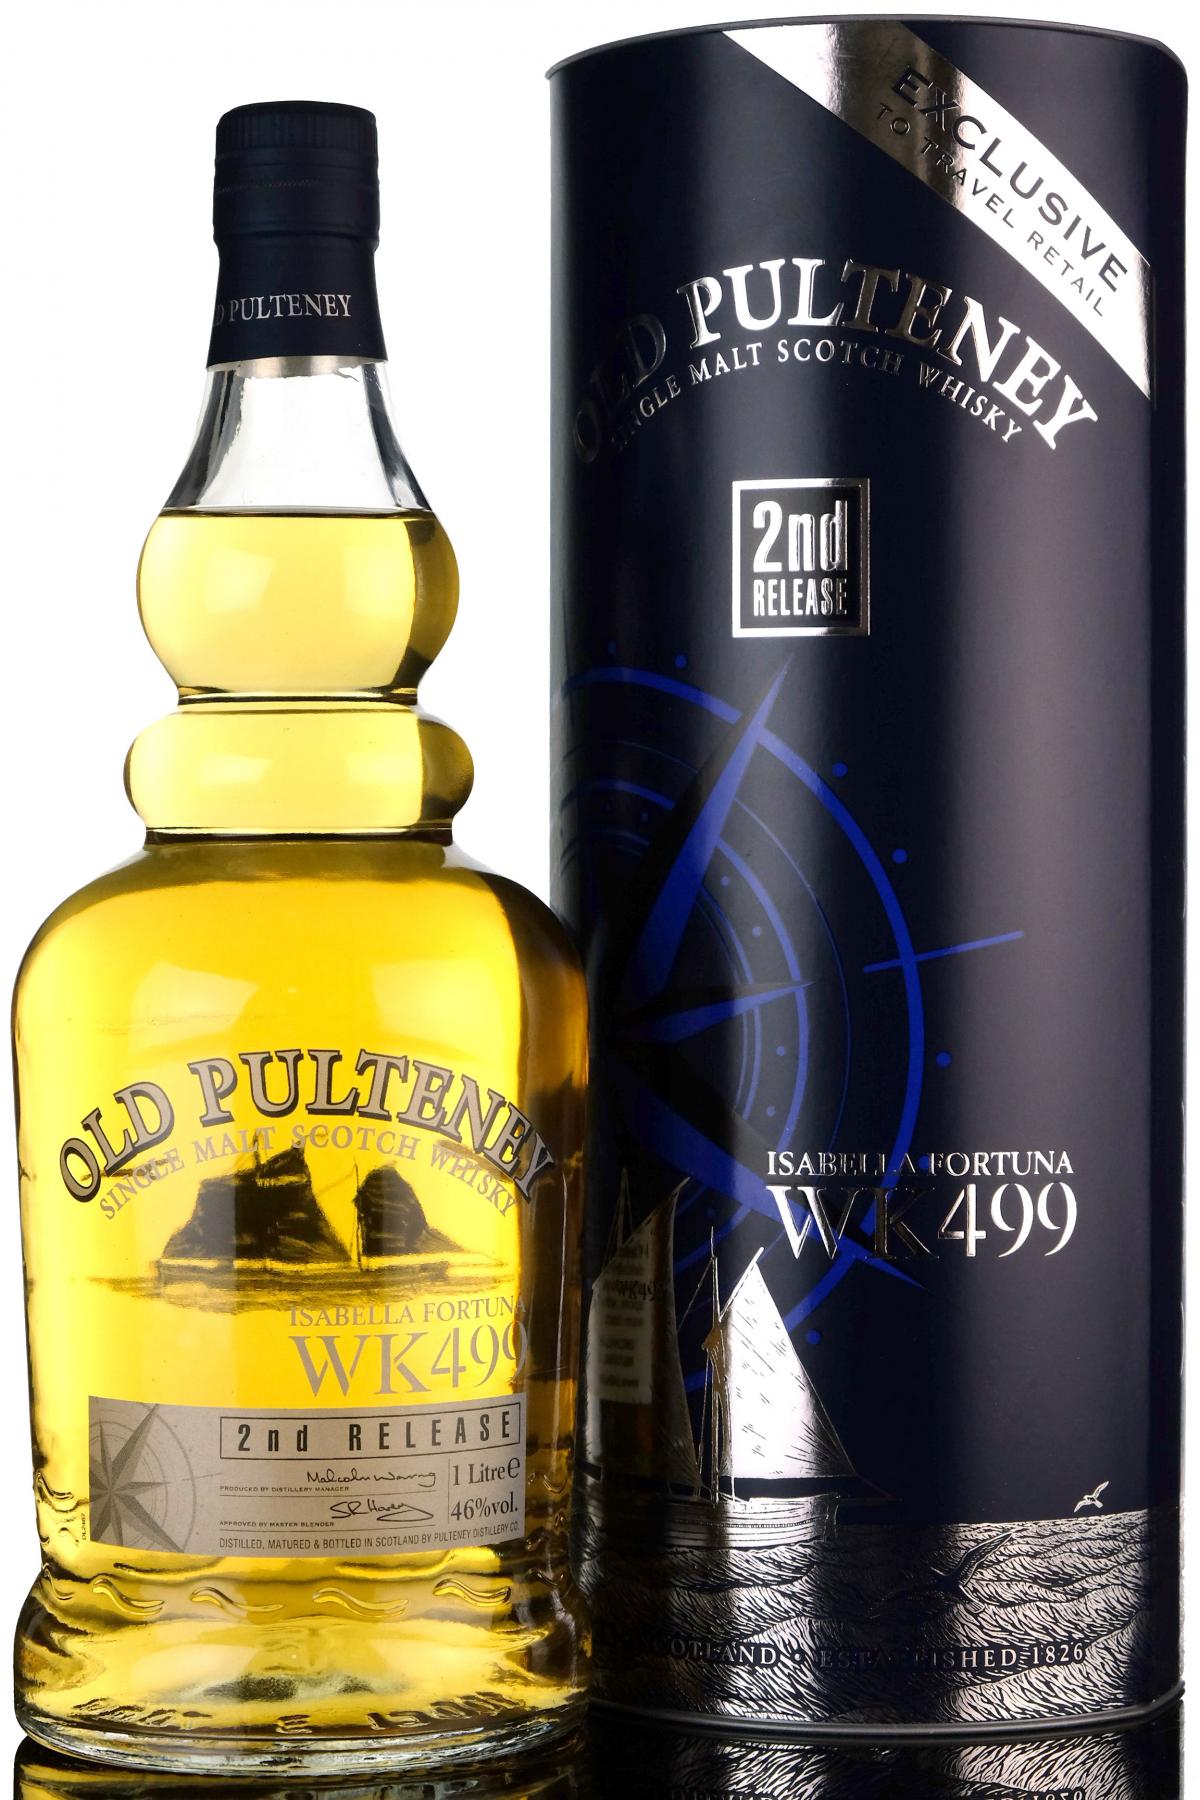 Old Pulteney Isabella Fortuna - 2nd Release WK499 - 1 Litre